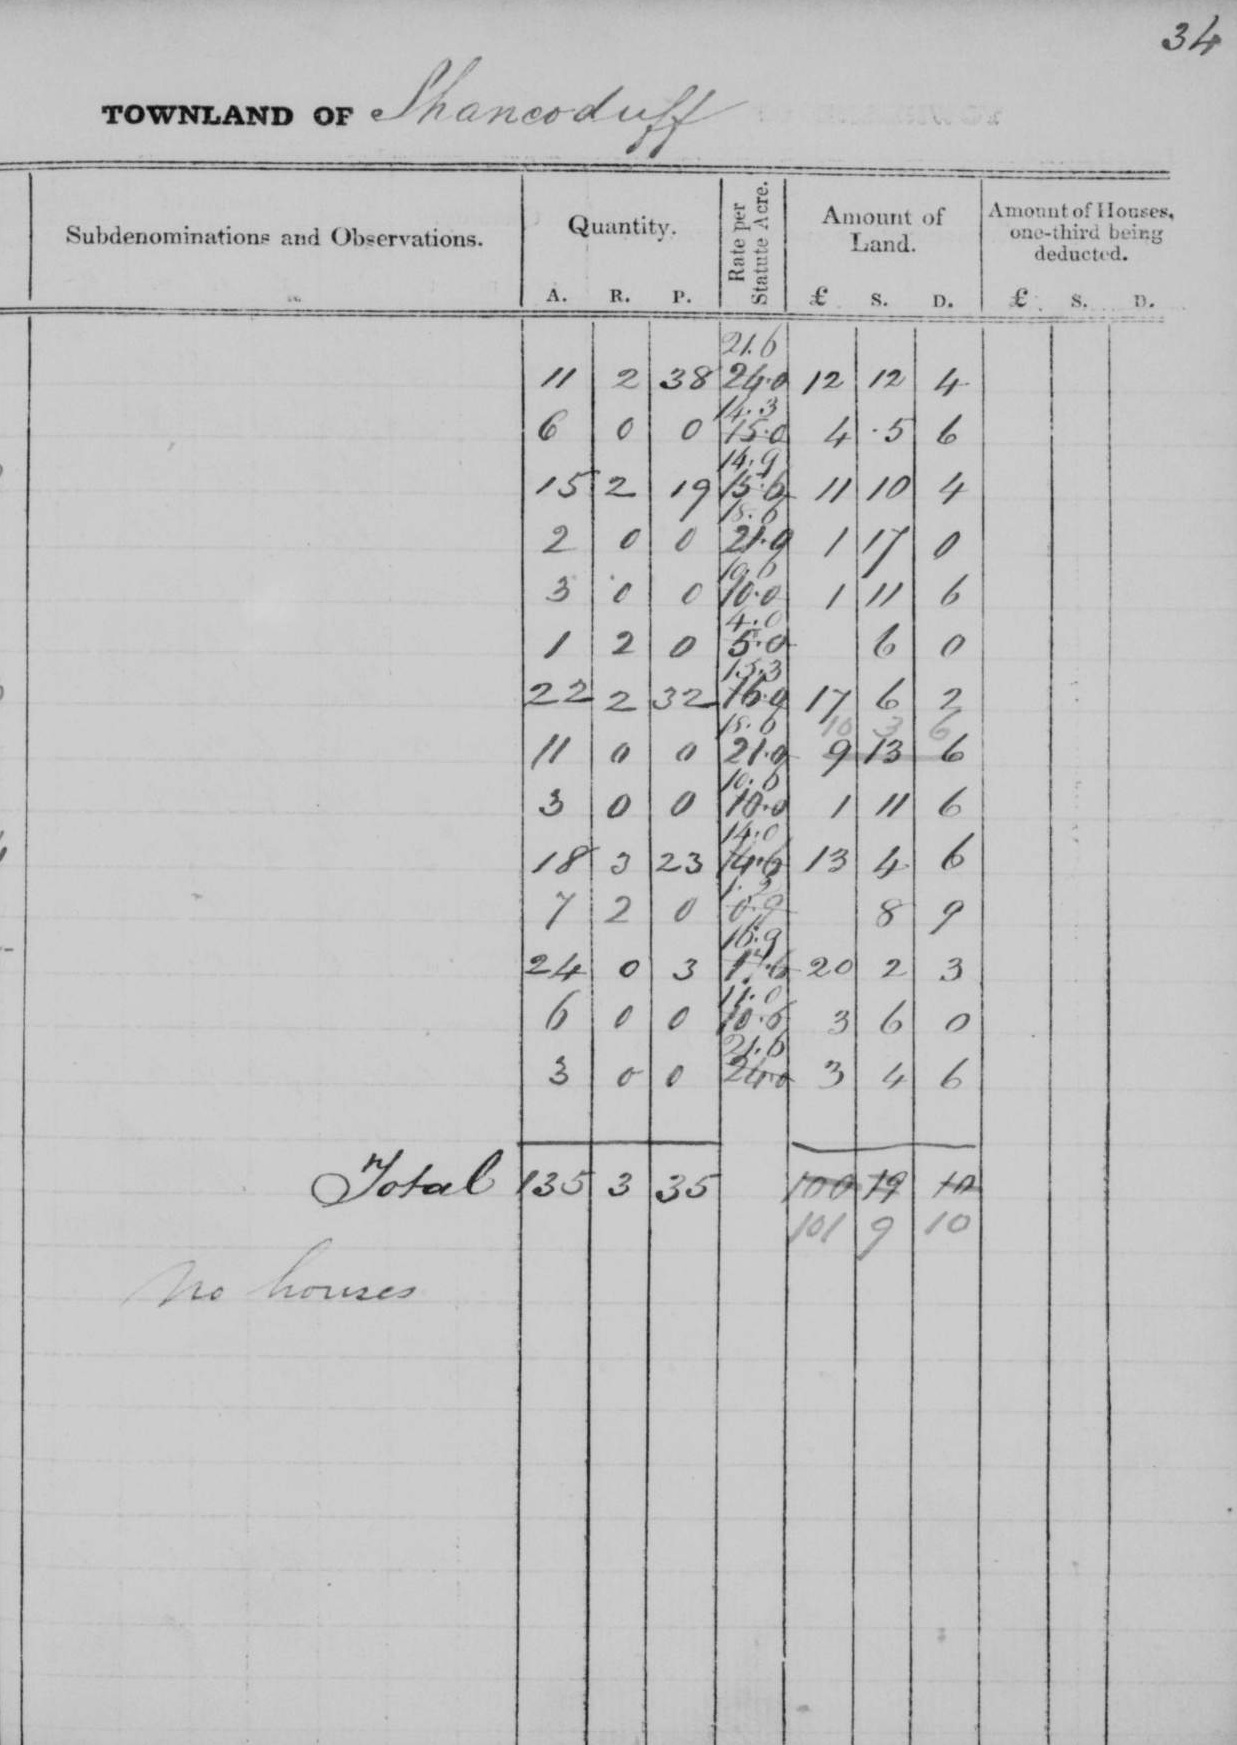 1839 Shancoduff Valuation Office Book from FMP 08 09 18 fr FMP 08 09 18